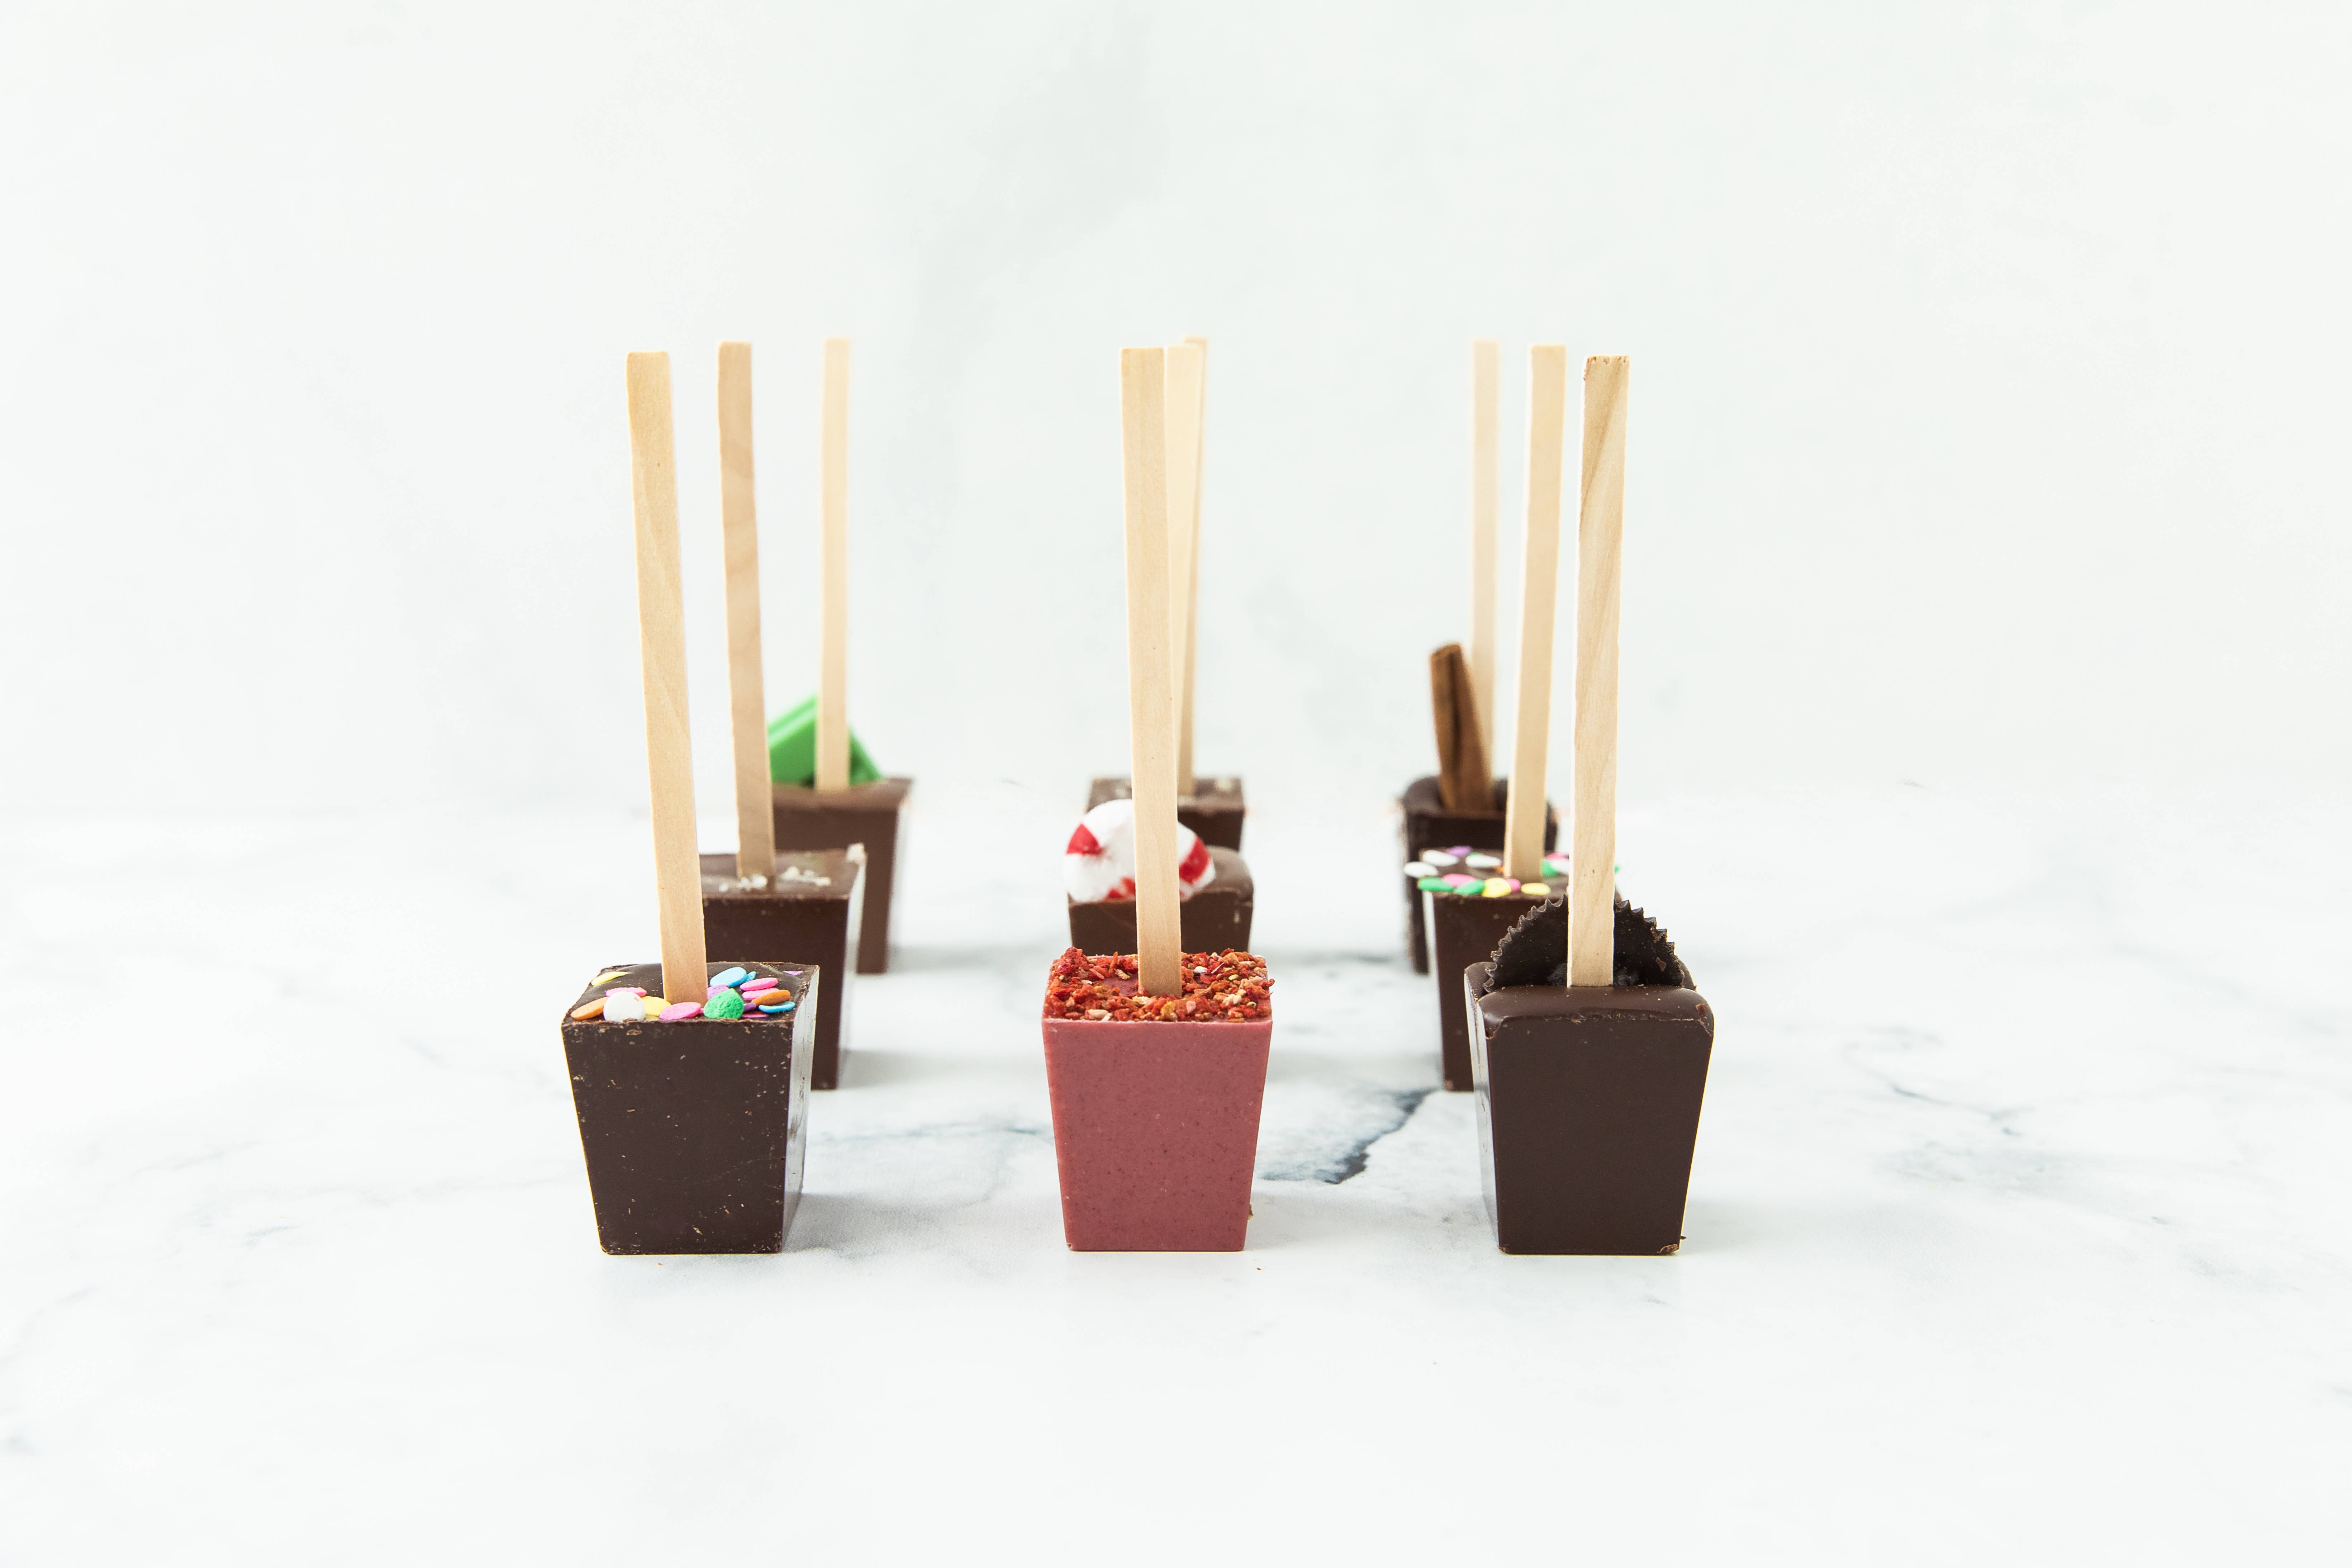 Melville Candy Gourmet Chocolate Stirrers - Naturally Flavored Stirrers for  Beverages - Chocolate with Mini Marshmallows, 8 Count